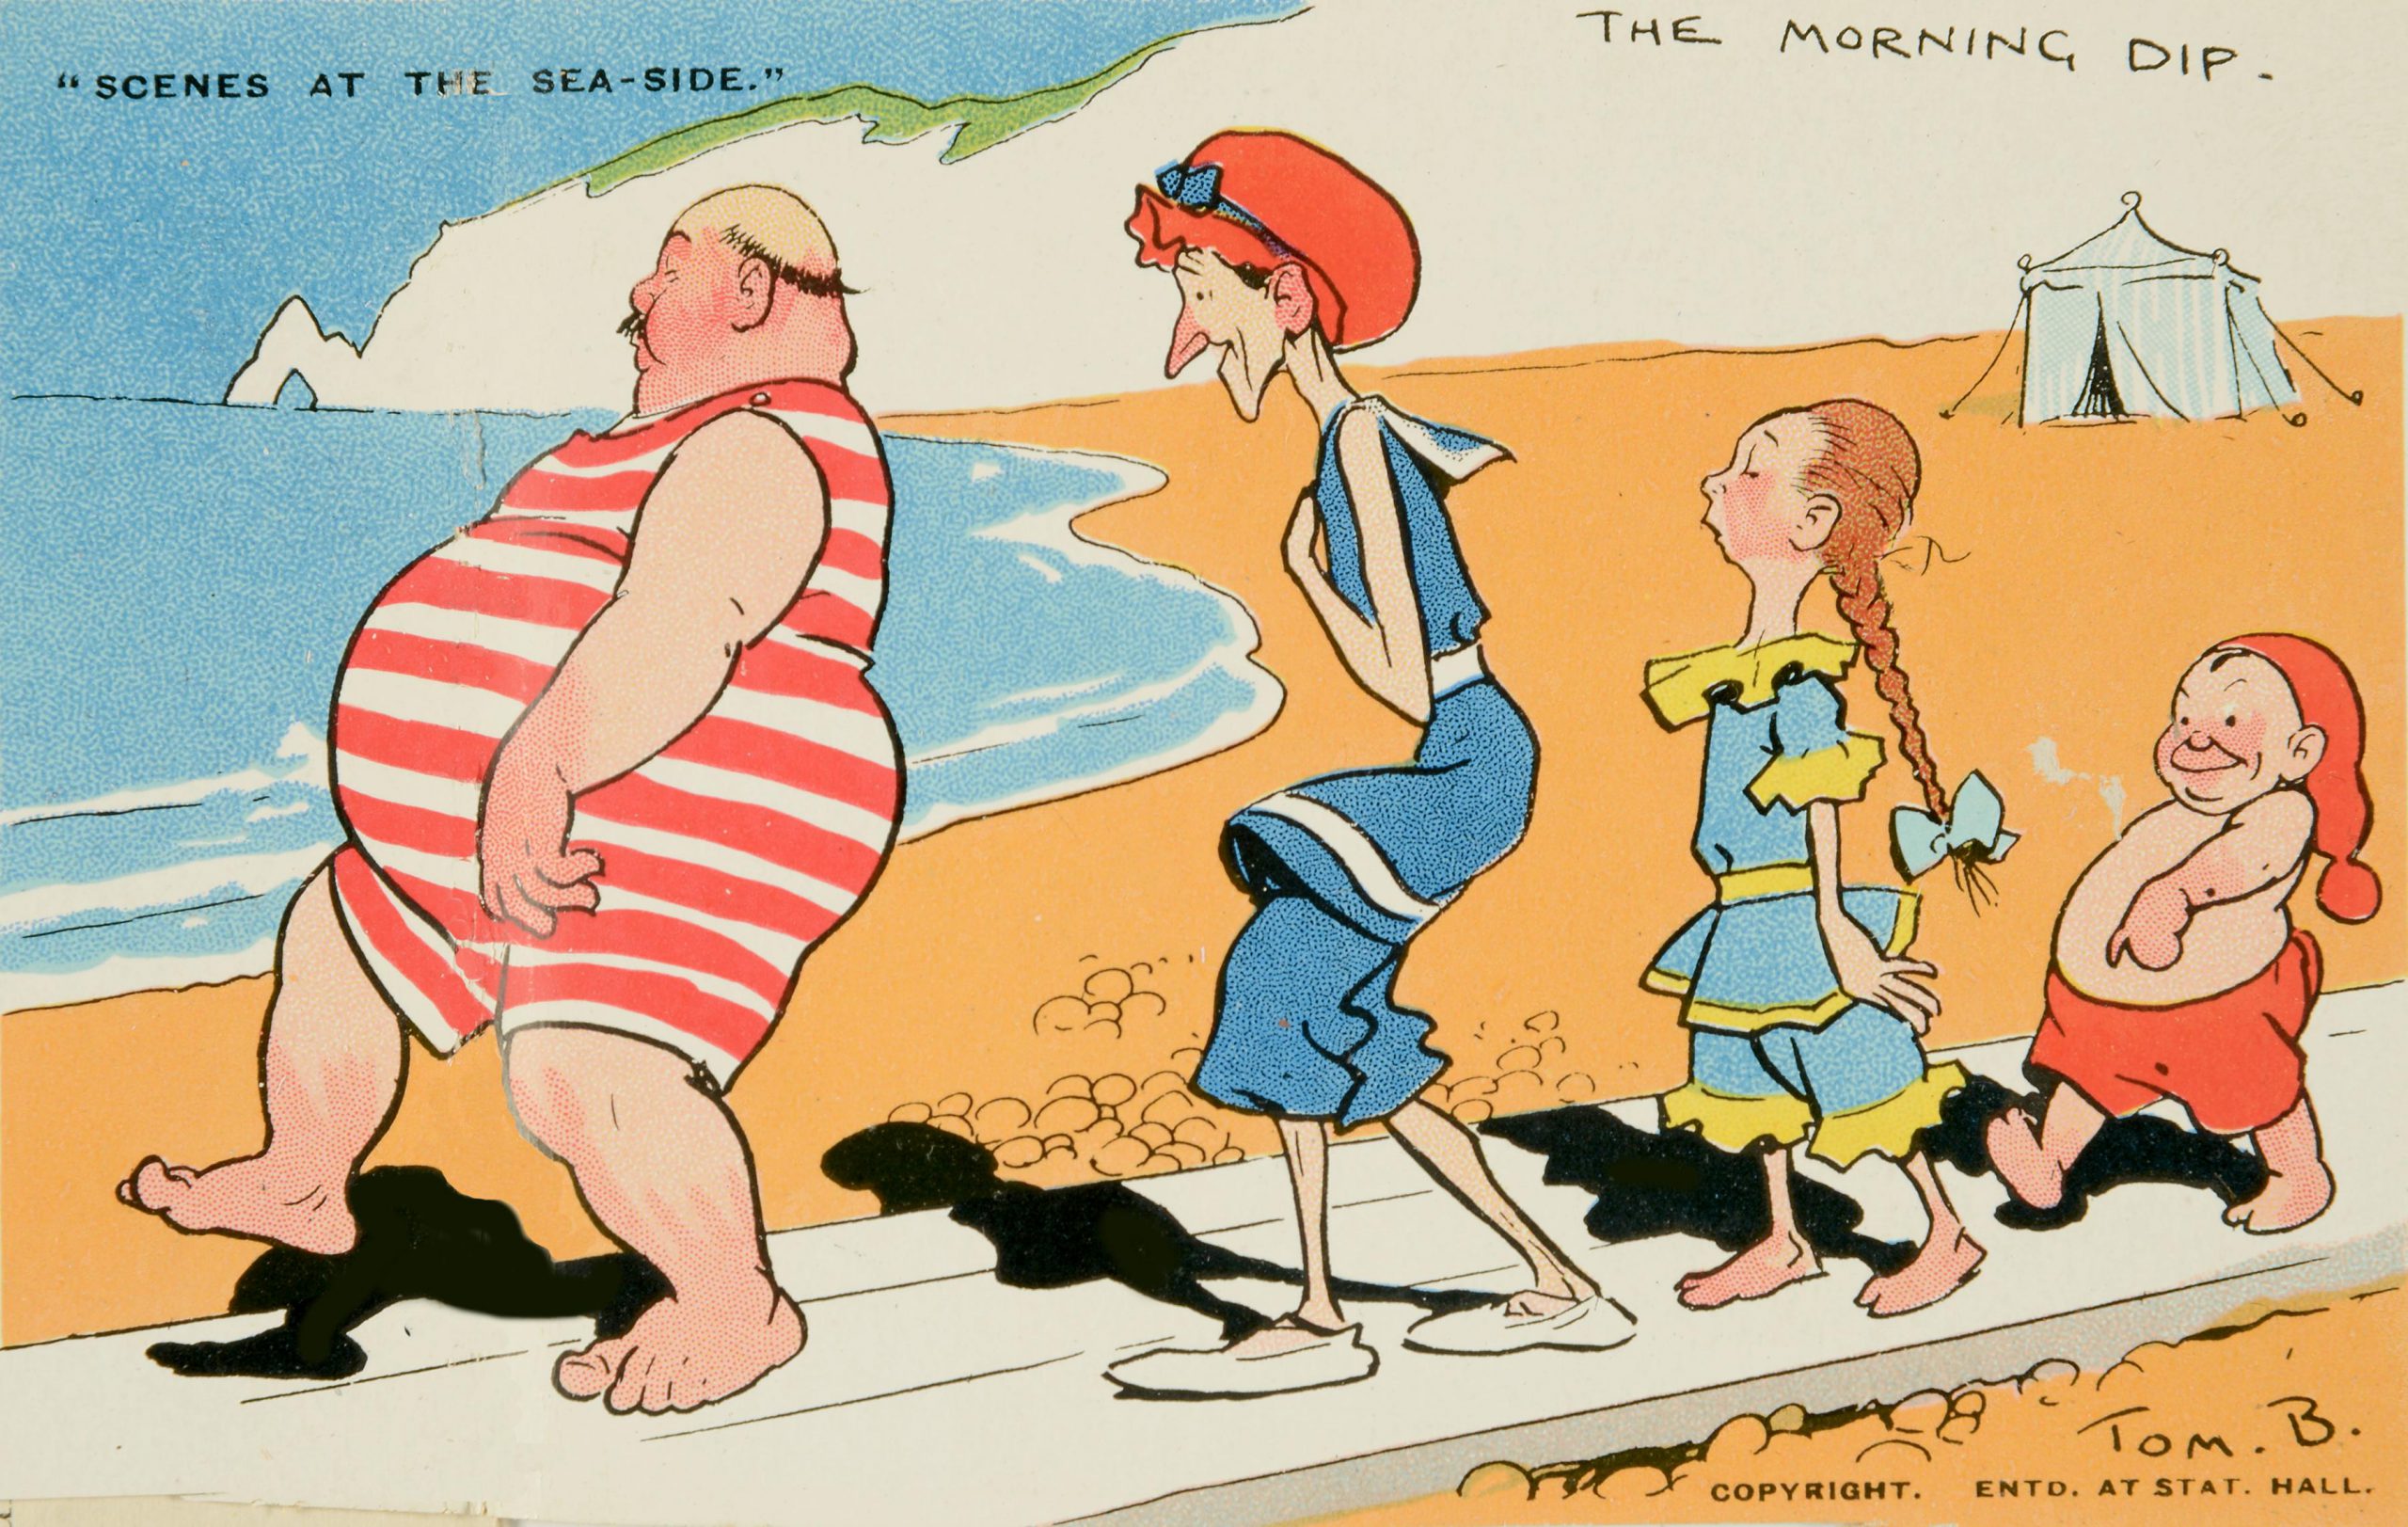 Cartoon of four people walking along a wooden walkway on a beach. Teach says ‘Scenes at the Sea-side’ and ‘The Morning Dip’.